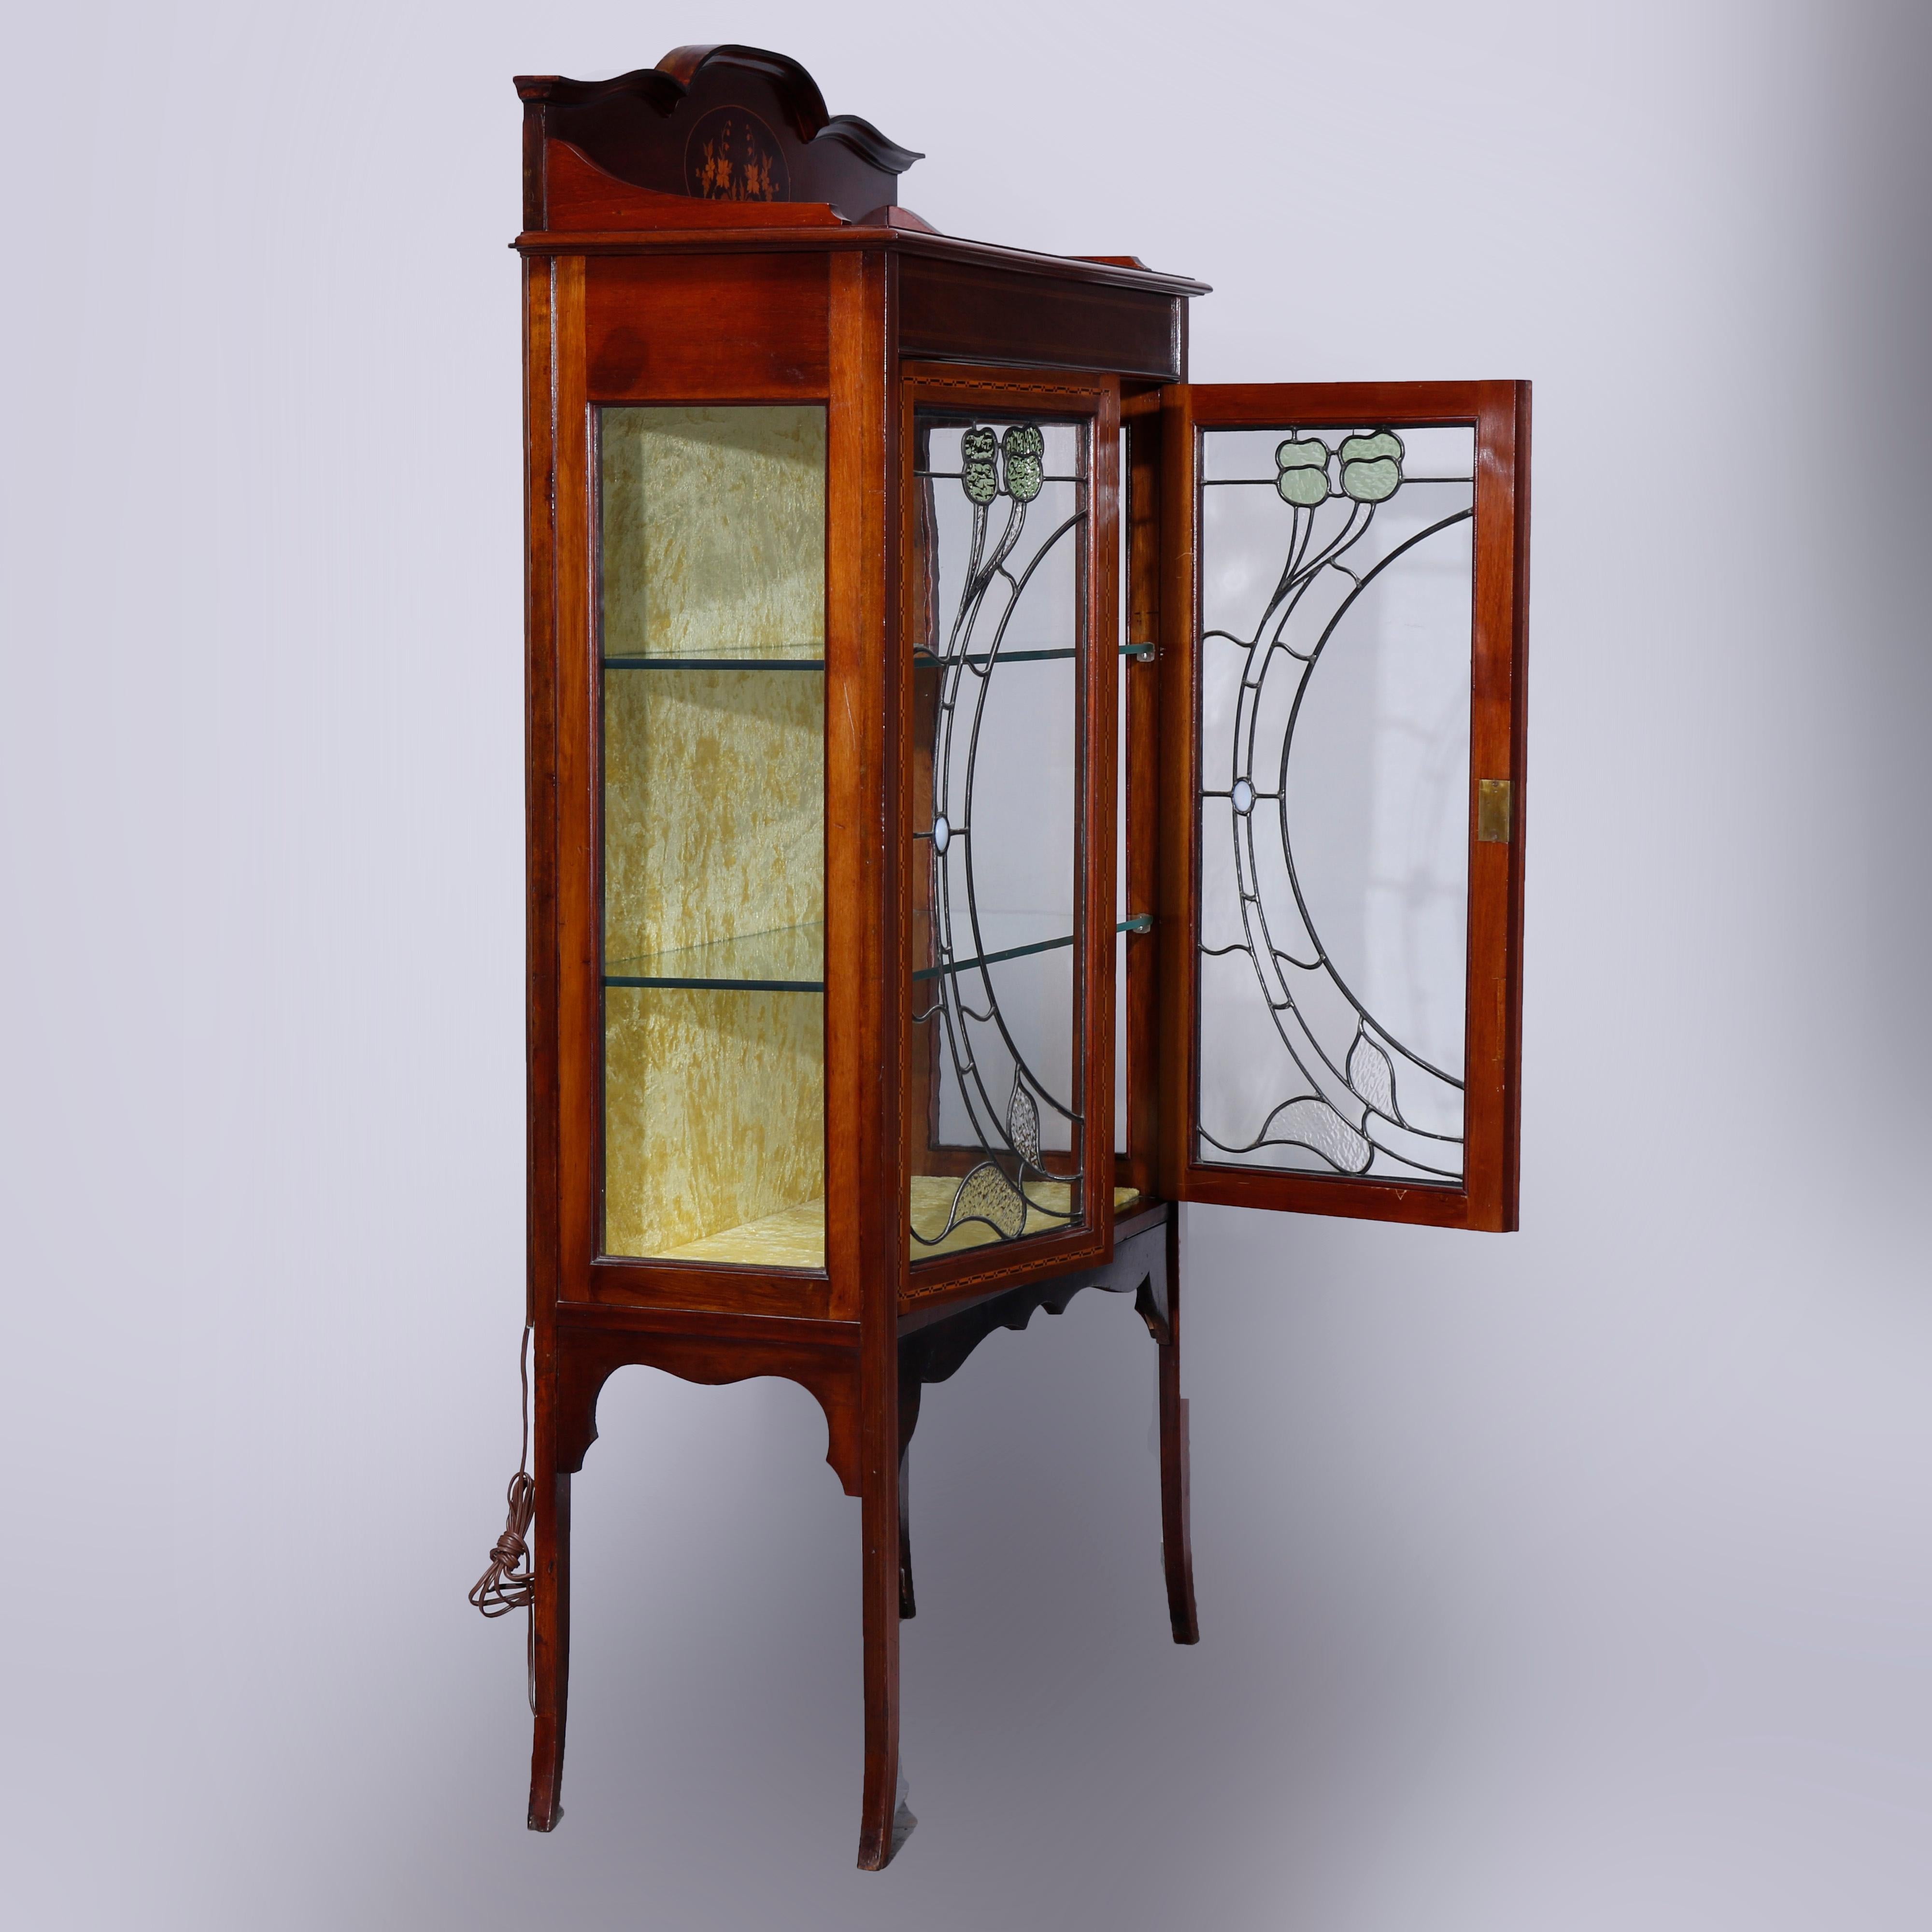 Ebonized Antique Art Nouveau Marquetry Inlaid Floral Leaded Glass China Cabinet, c1900